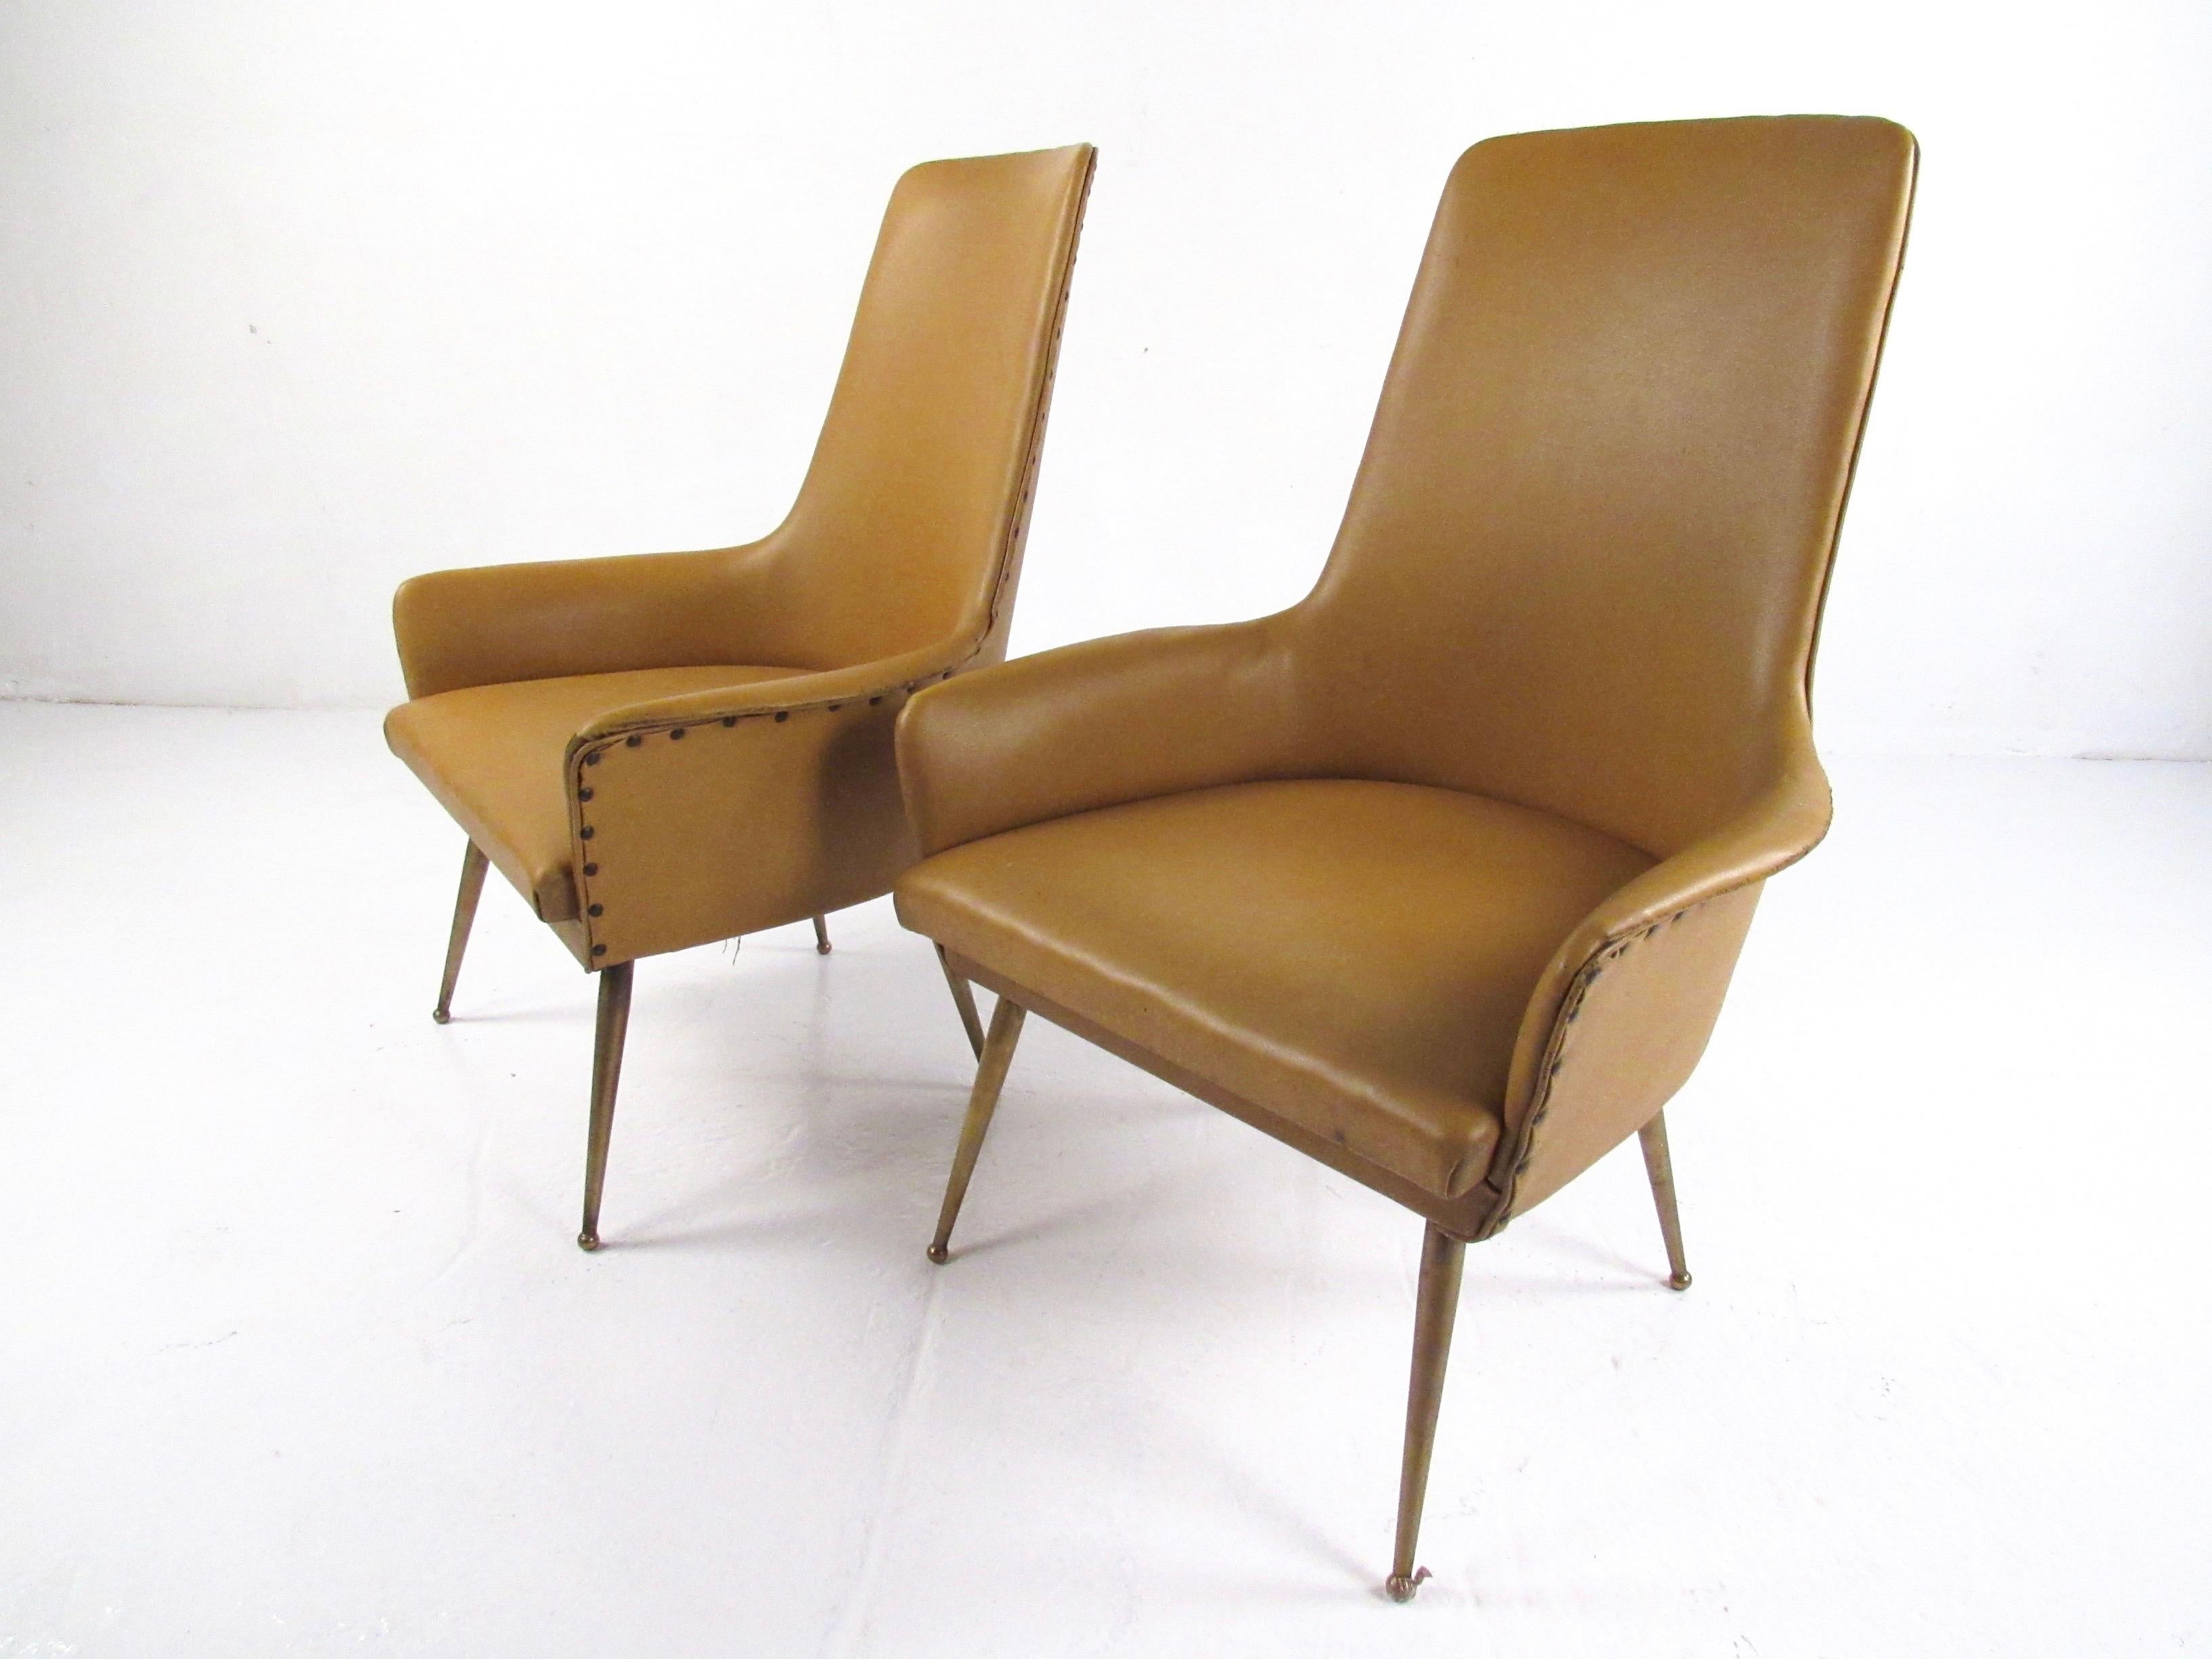 This striking pair of vintage modern side chairs feature exquisite midcentury Italian design including tall sculpted seat backs, low wing-like arms, and tapered brass finish legs. Comfortable and stylish, this matched pair of armchairs make an